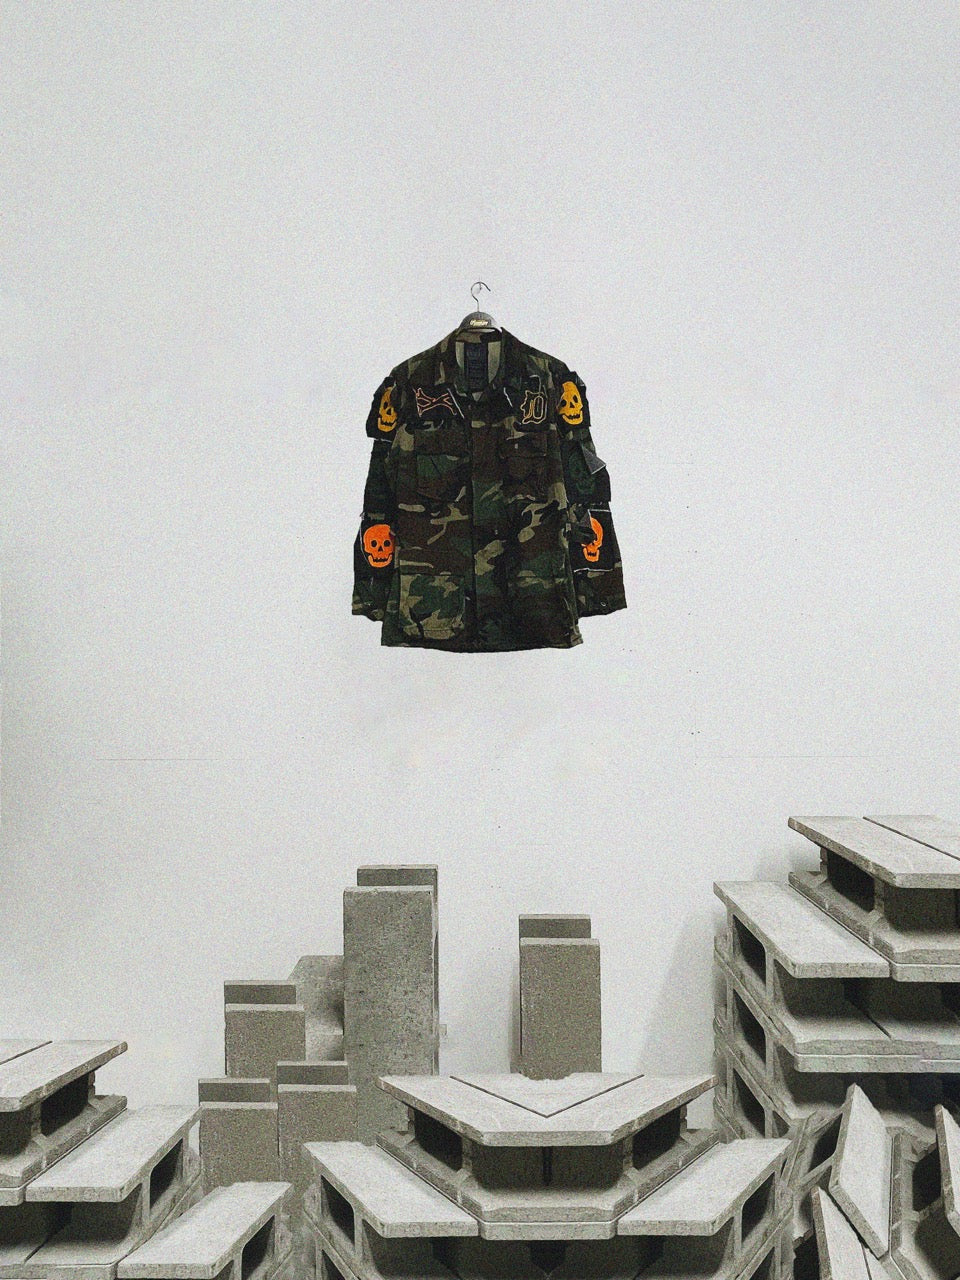 EMBROIDERED CAMO JACKET #2 - Studio Stars - by death